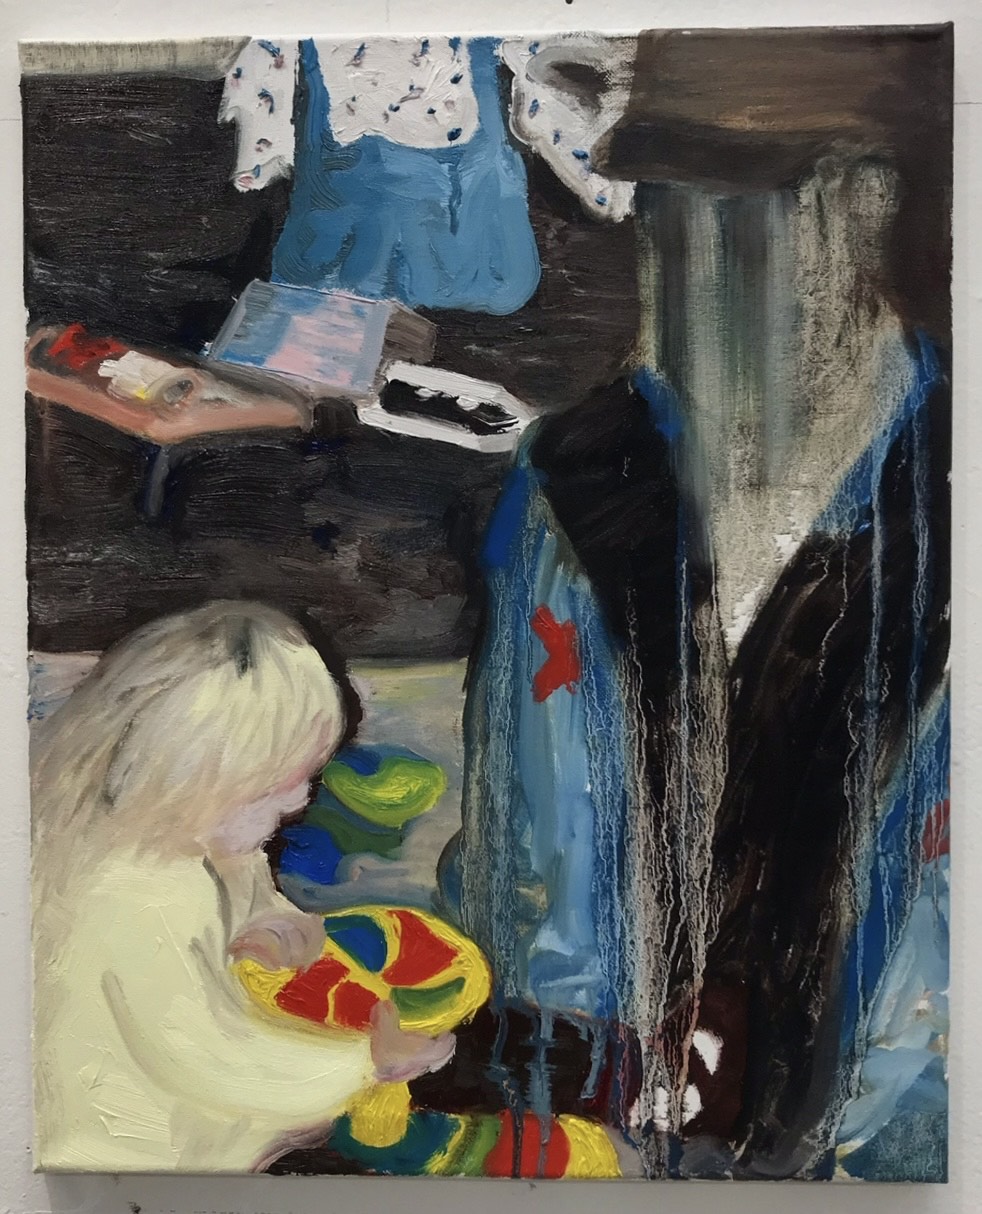 A little blonde child plays on a 'sit-and-spin' while a ghost-like figure looms over her